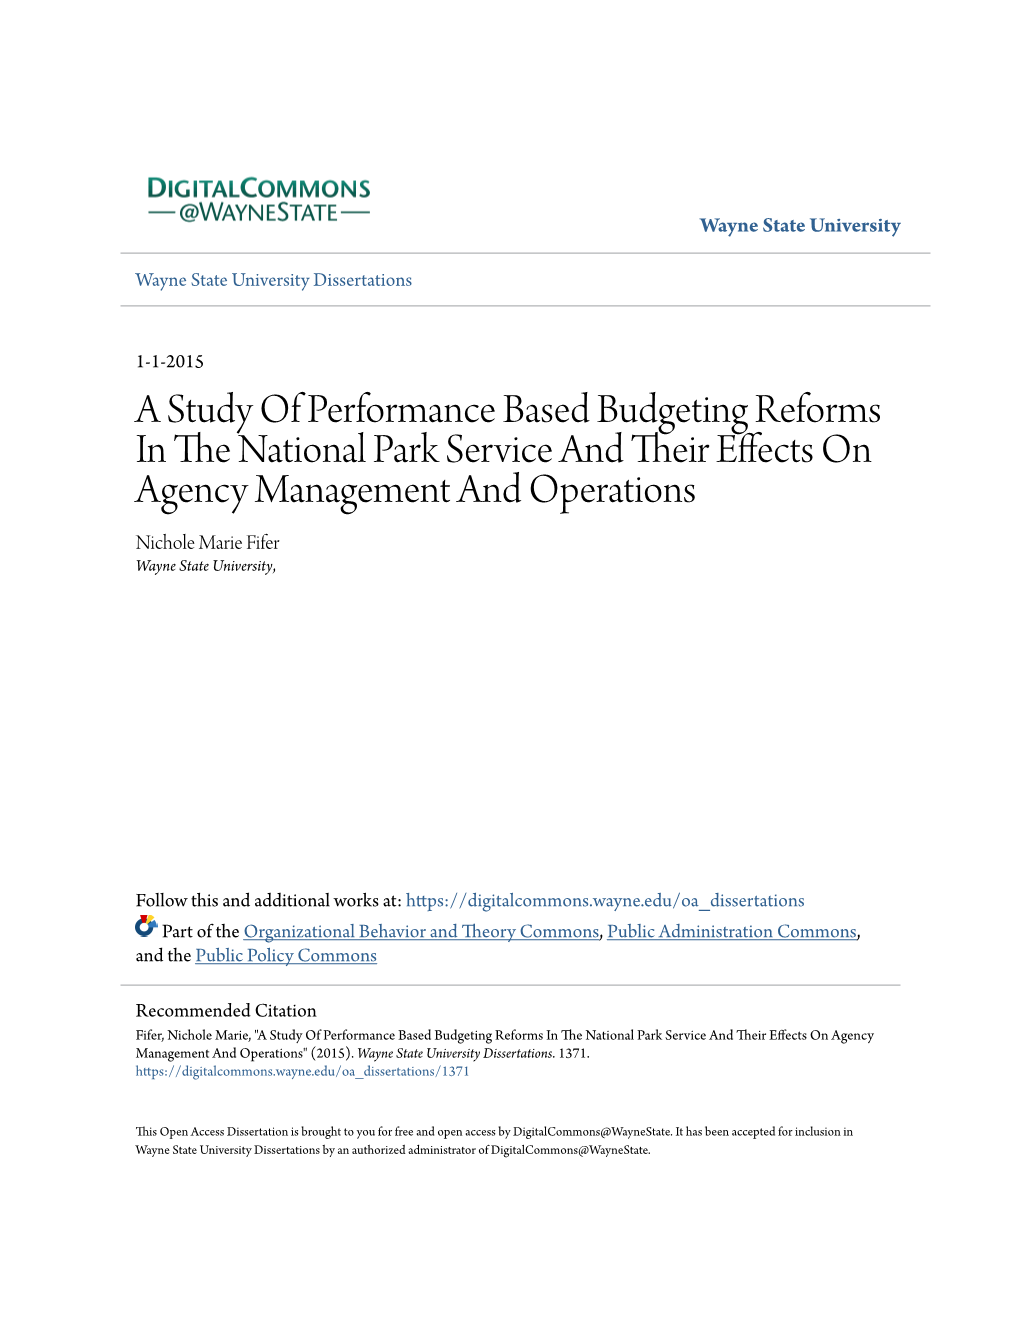 A Study of Performance Based Budgeting Reforms in the National Park Service and Their Effects on Agency Management and Operations